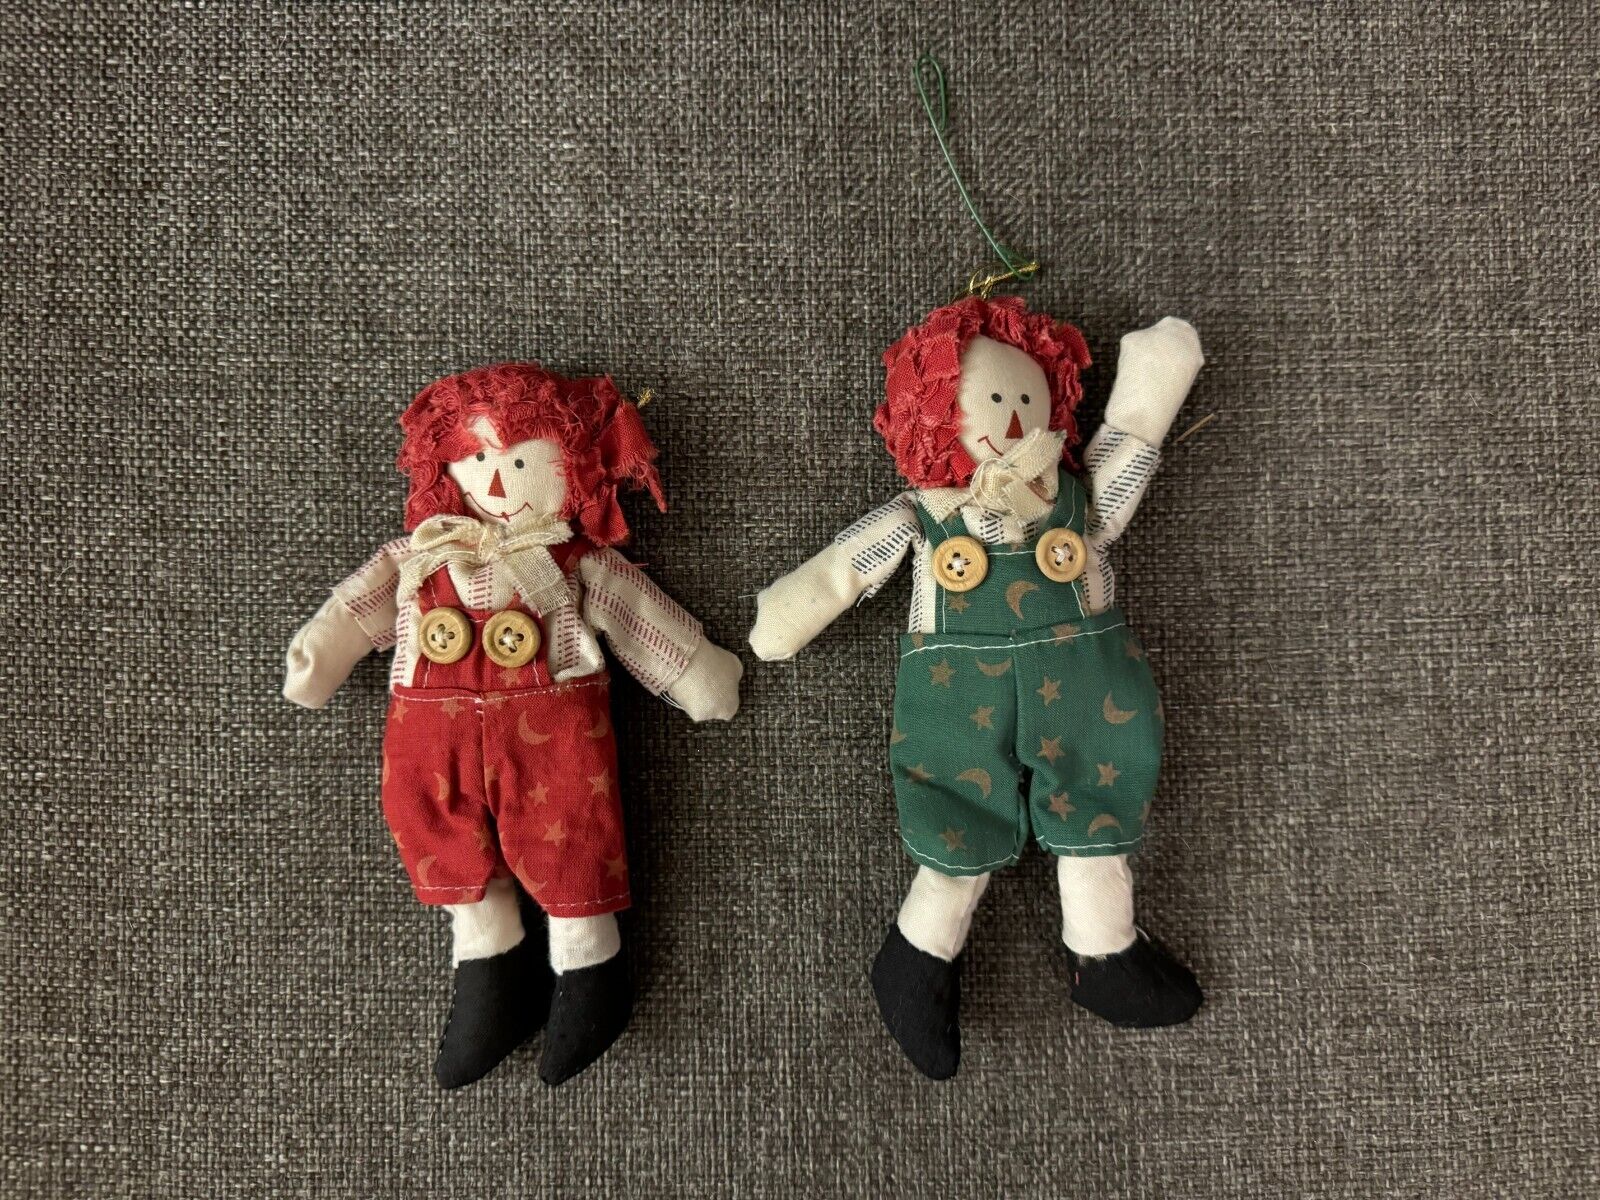 Vintage Handmade Raggedy Ann and Andy Doll Holiday Ornaments